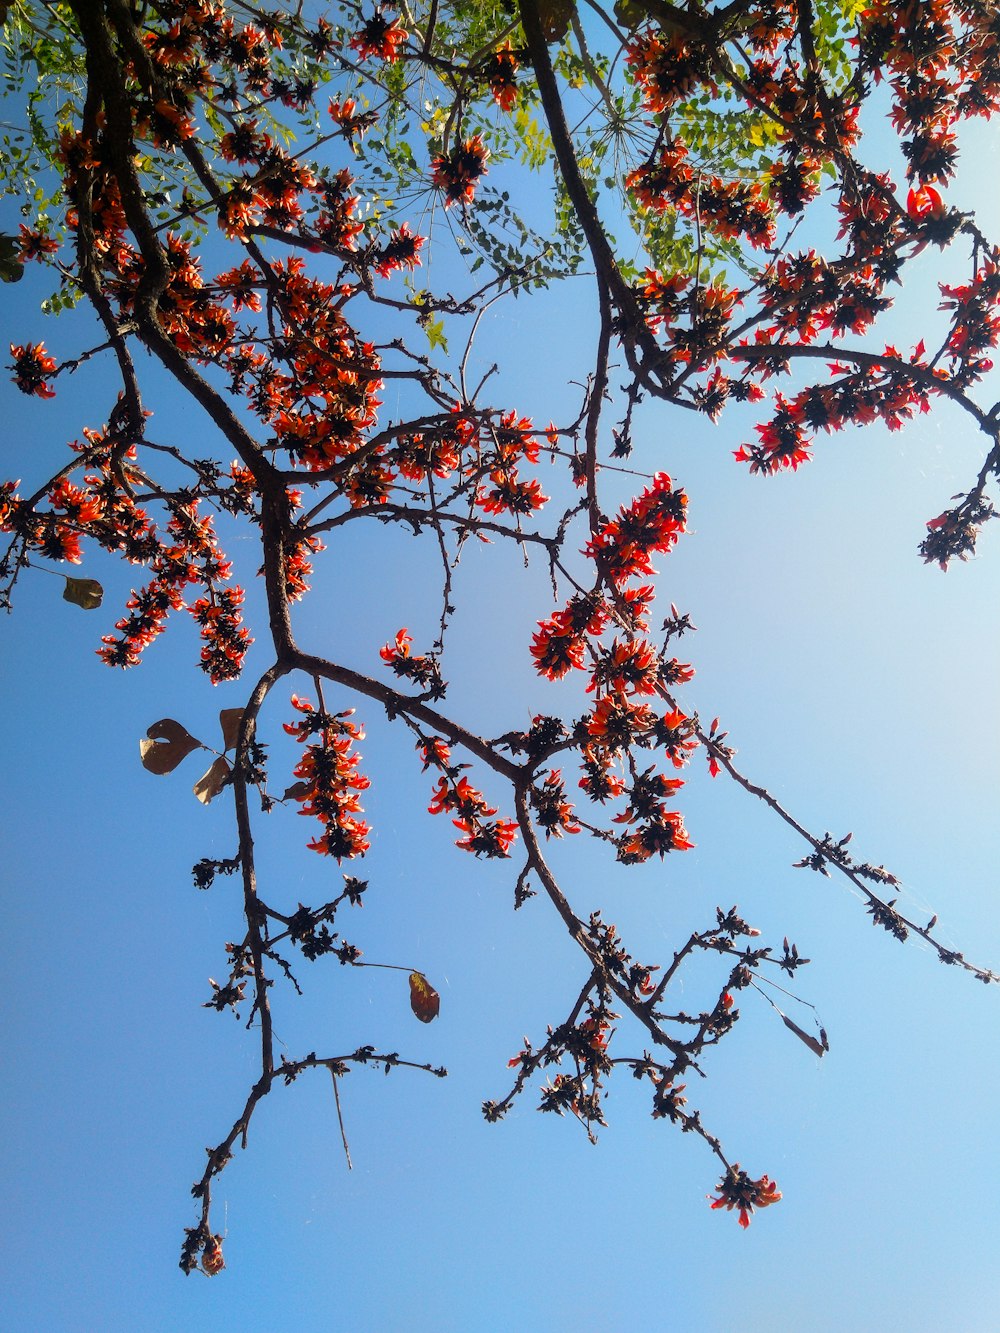 a tree with red flowers and a blue sky in the background